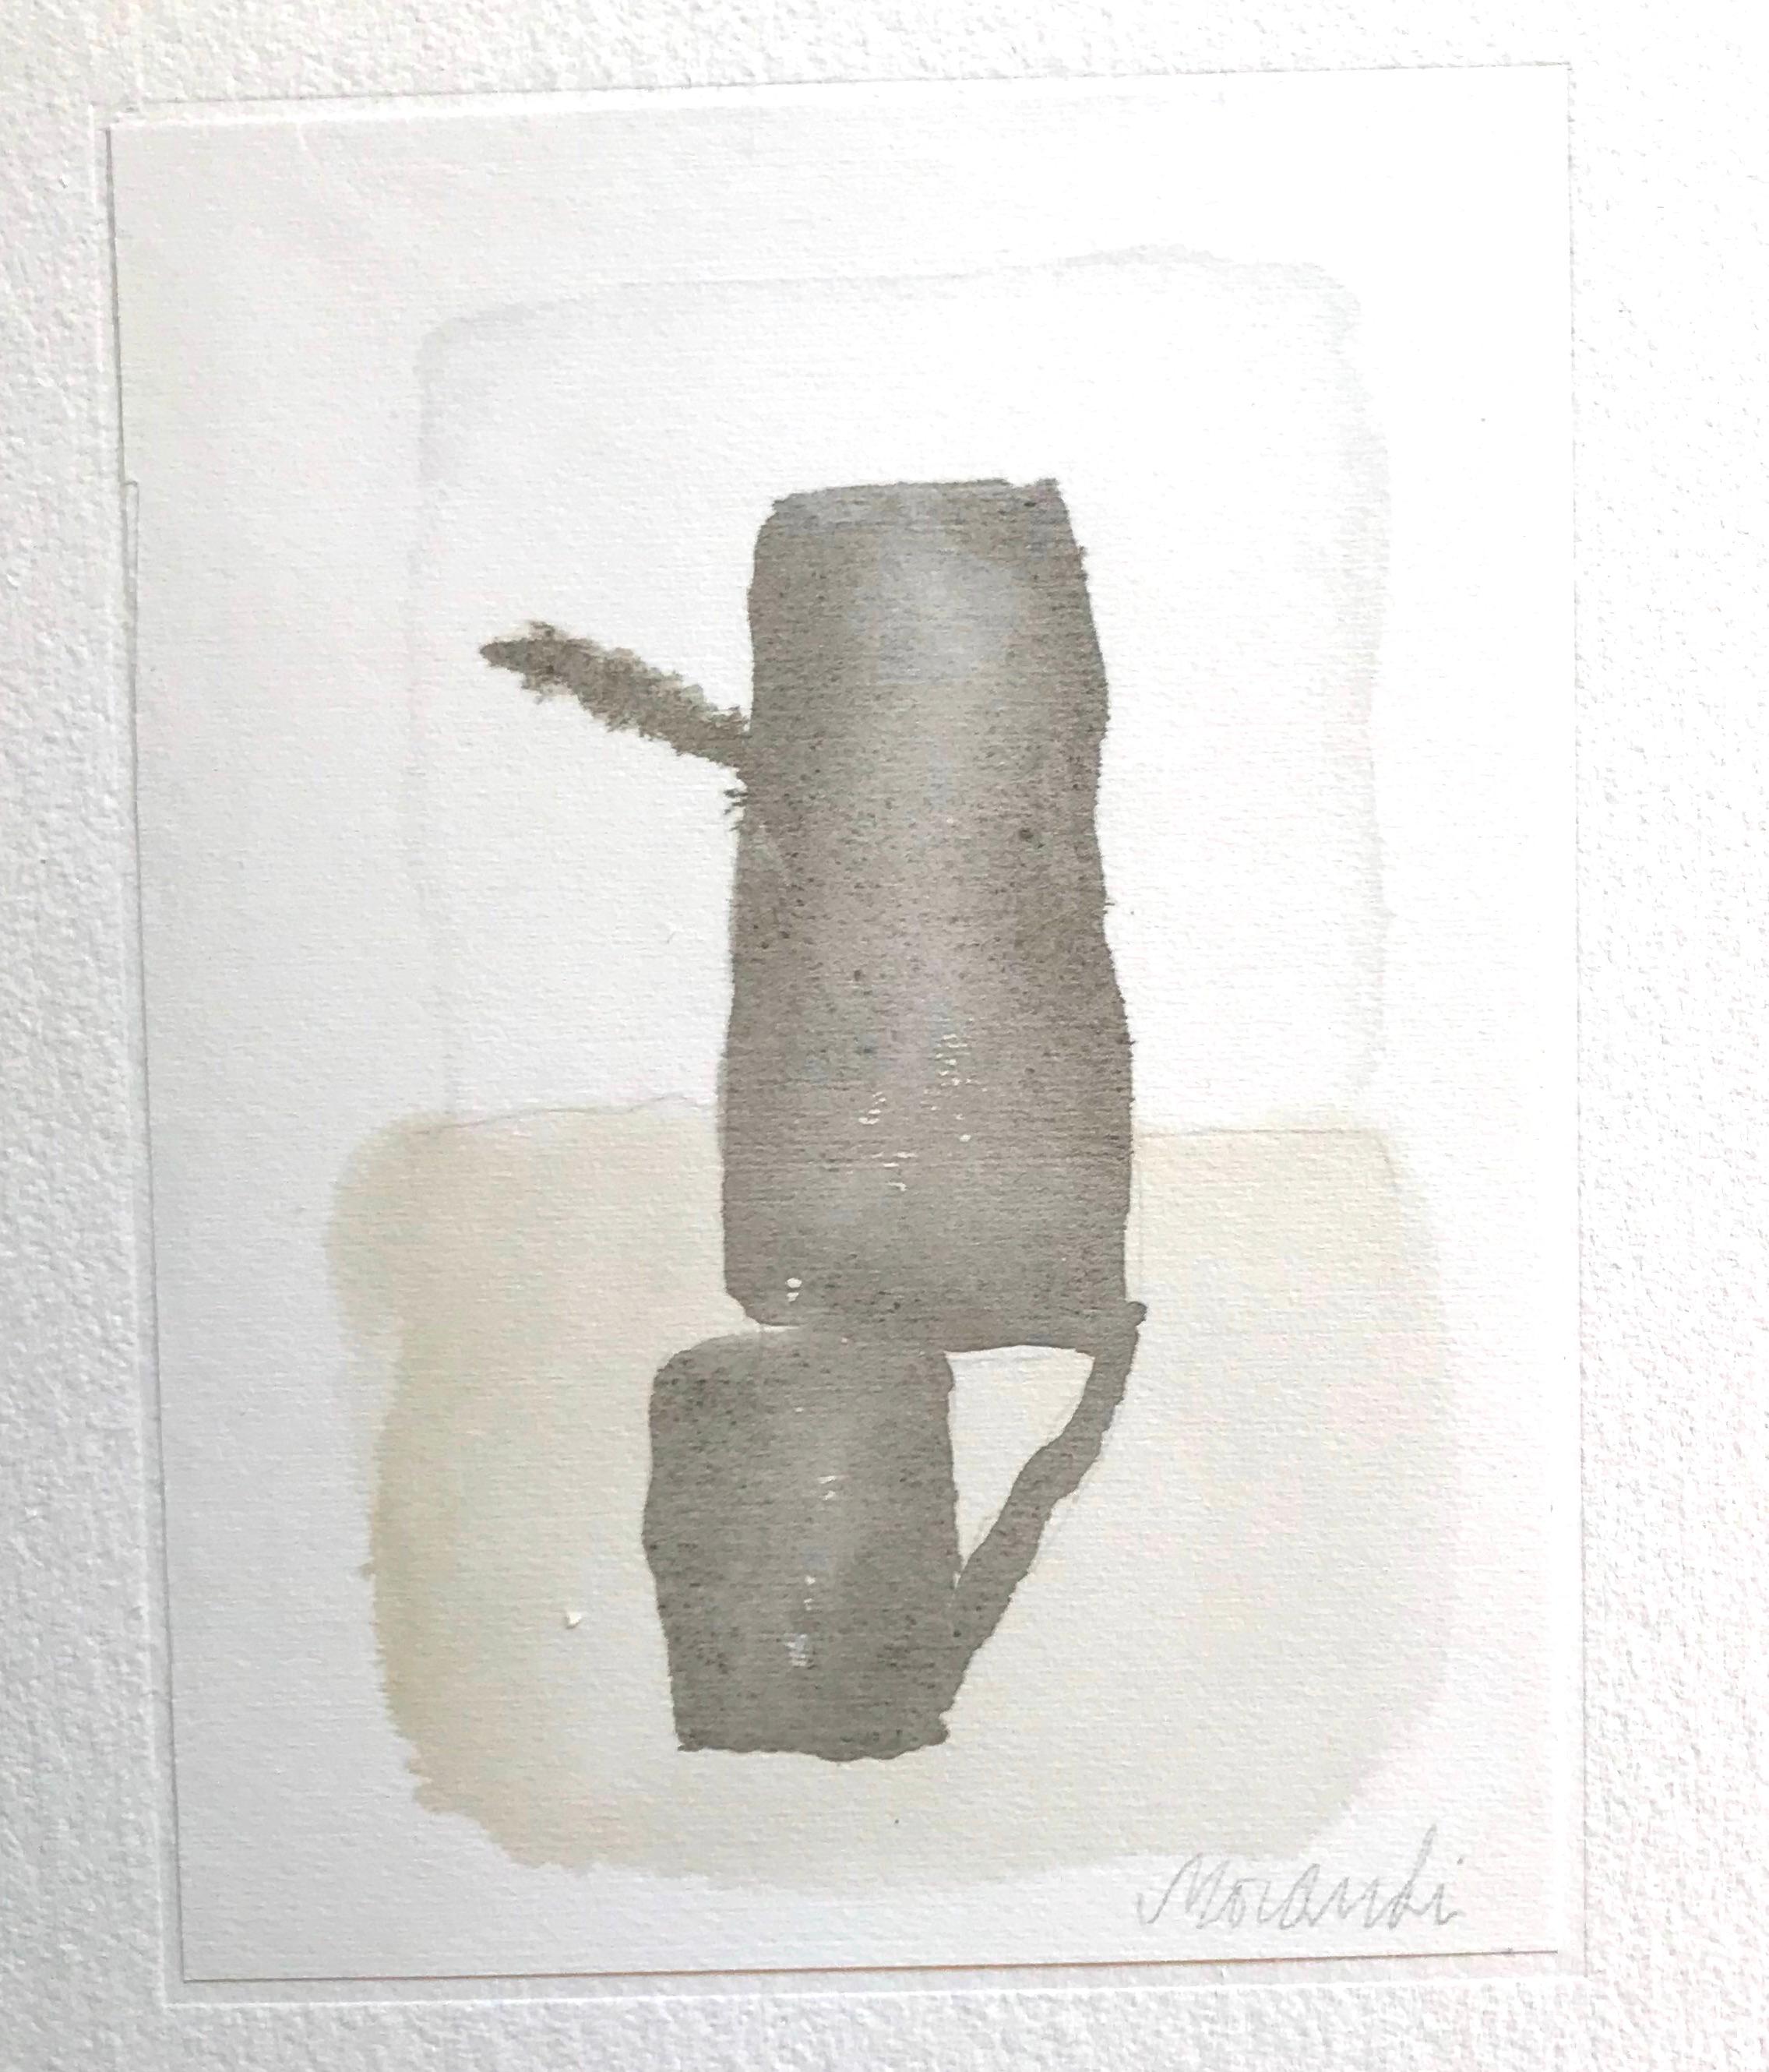 Watering Cans is a superb original offset print, reproducing the original watercolor by Giorgio Morandi.

Also the signature in pencil by the artist is perfectly reproduced.

From the volume "L'Opera grafica di Giorgio Morandi", text by Lamberto